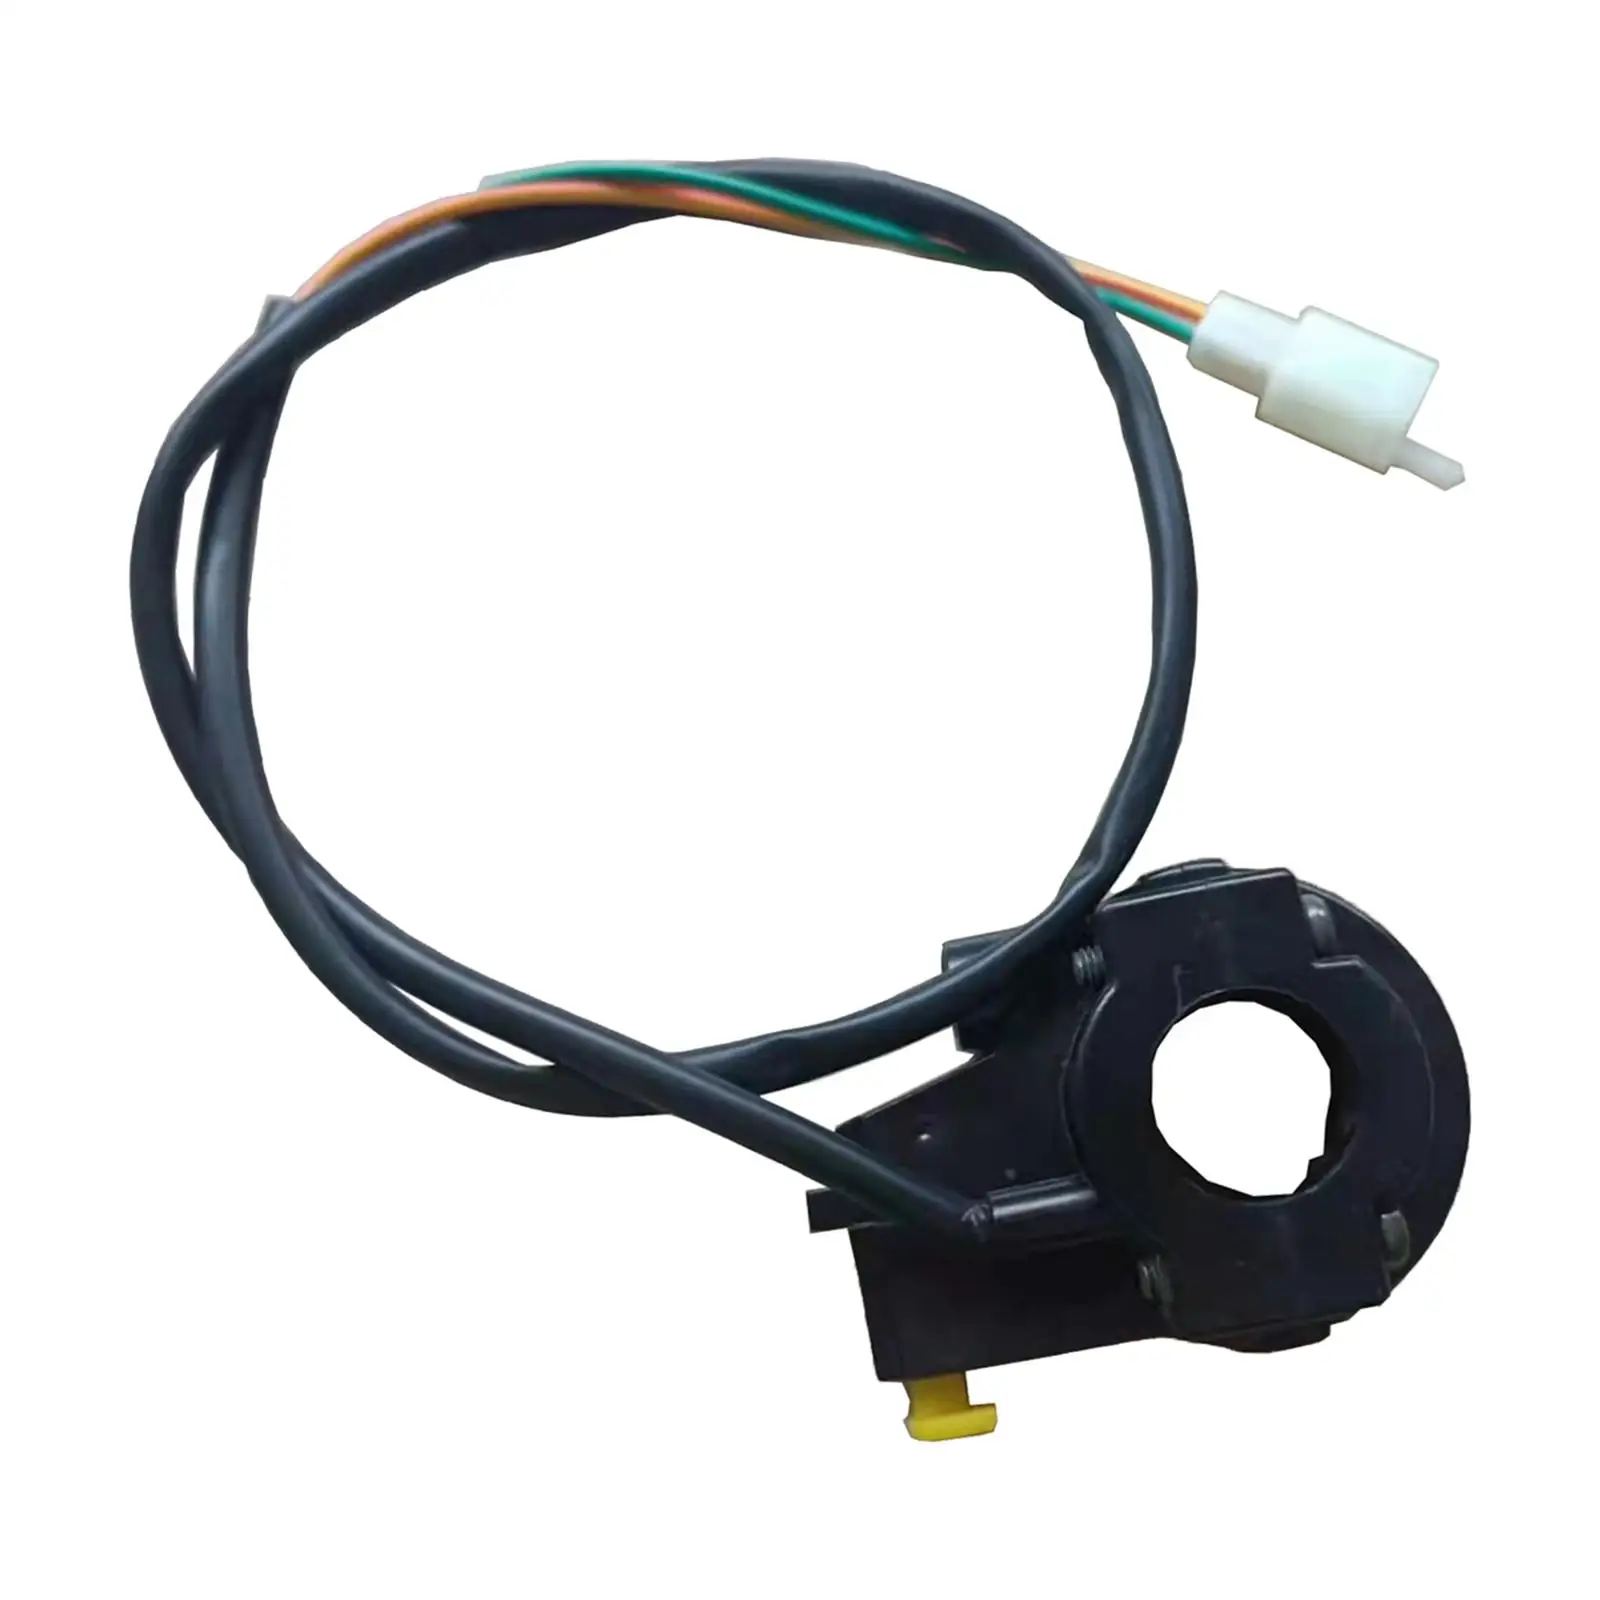 Motorcycle Engine Start Kill Switch Handlebars Mount for Scooter Quad